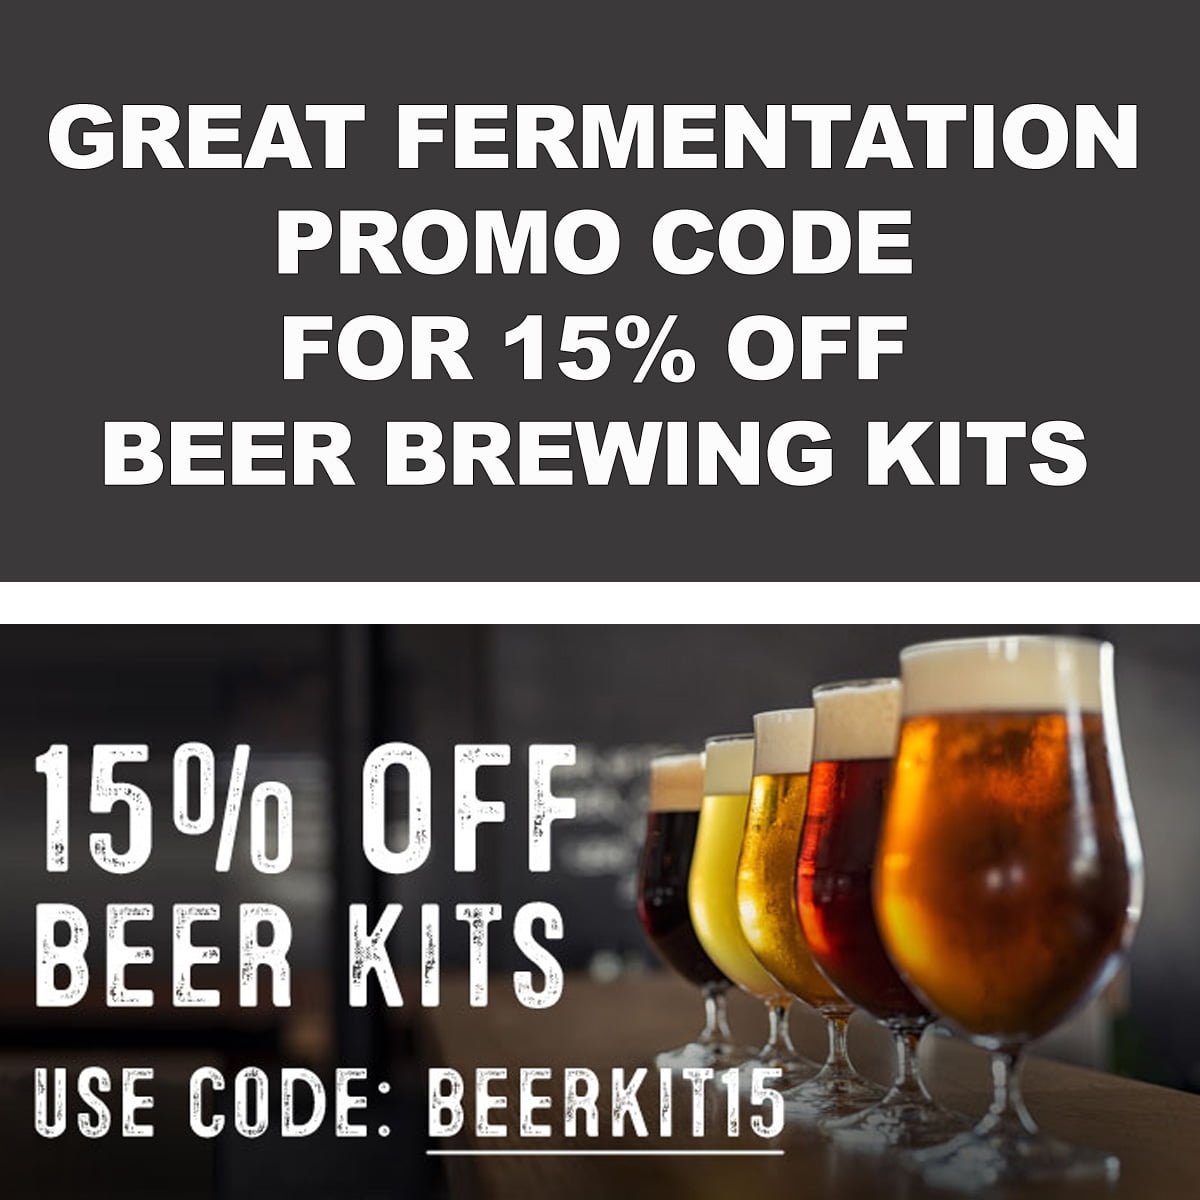 GreatFermentations.com Promo Code Save 15% On Homebrewing Beer Kits